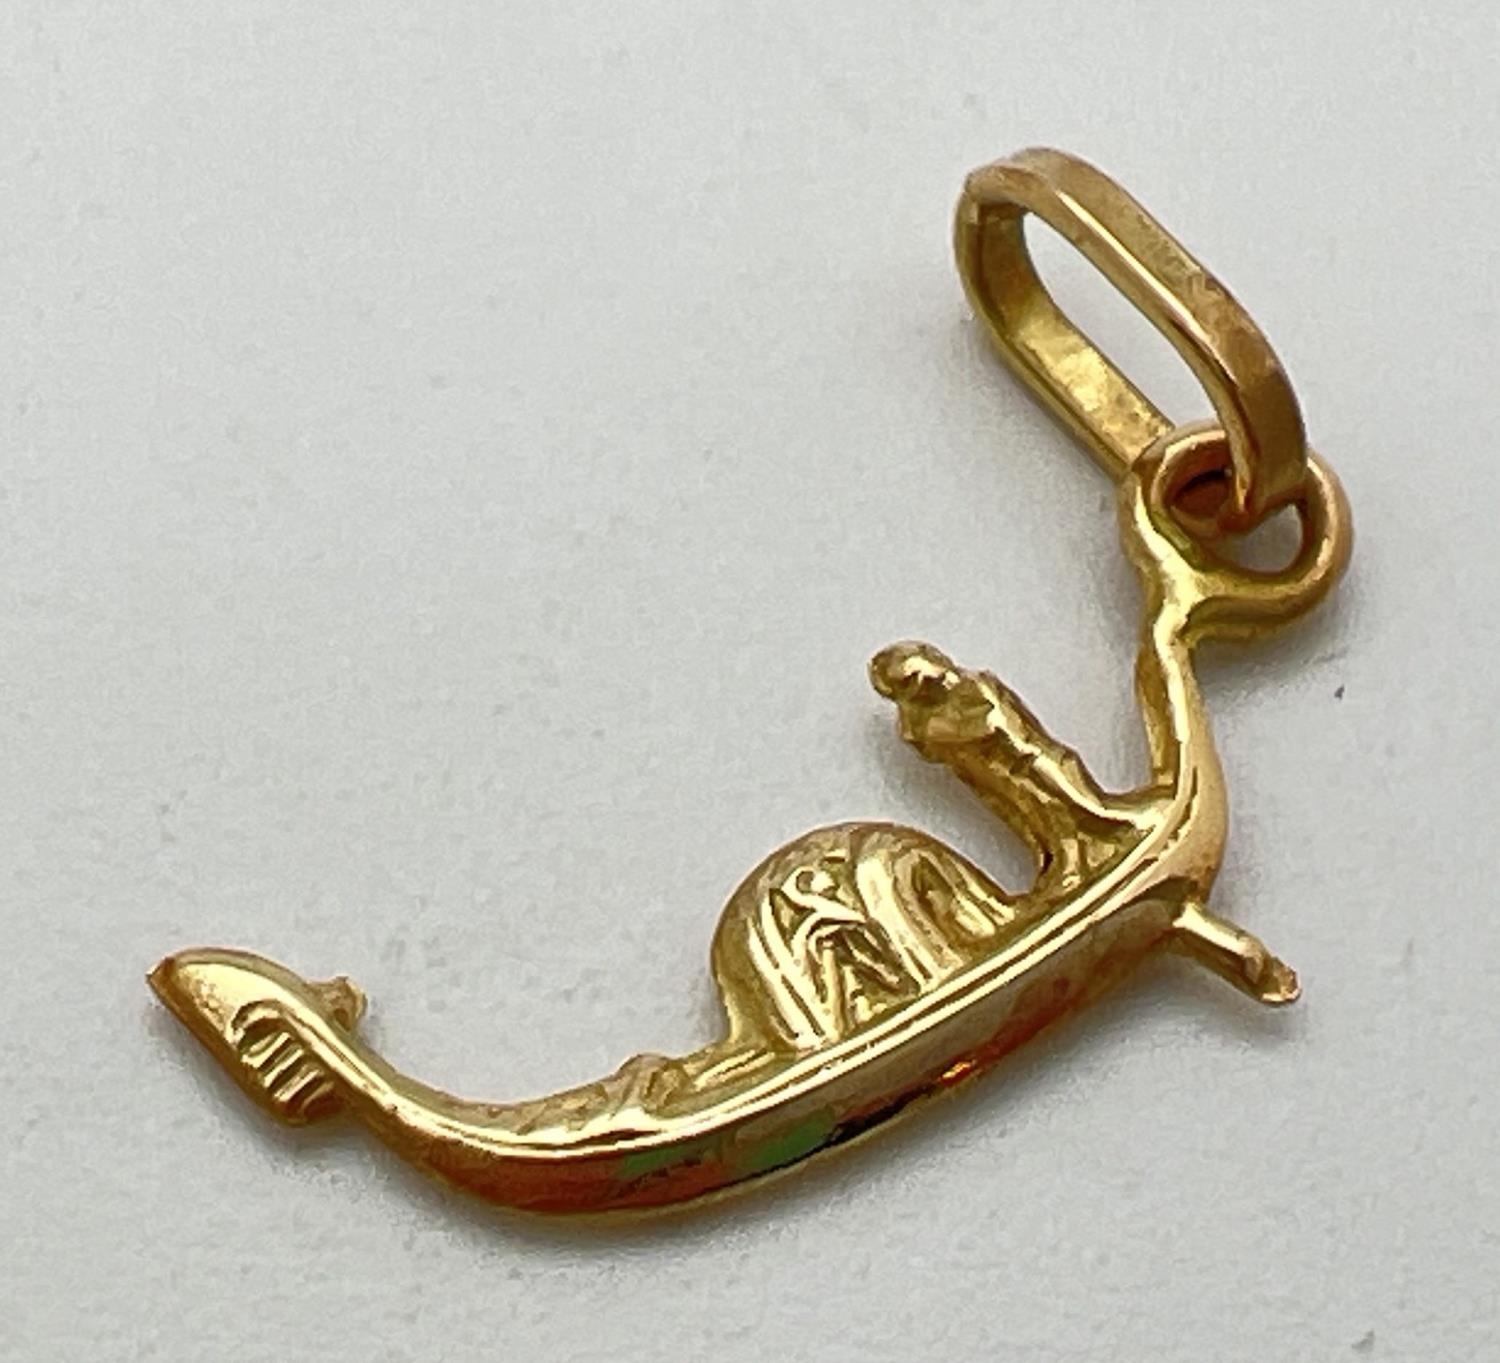 An 18ct gold charm/pendant in the shape of a gondola. Gold marks to bale. Approx. 2.5cm long (